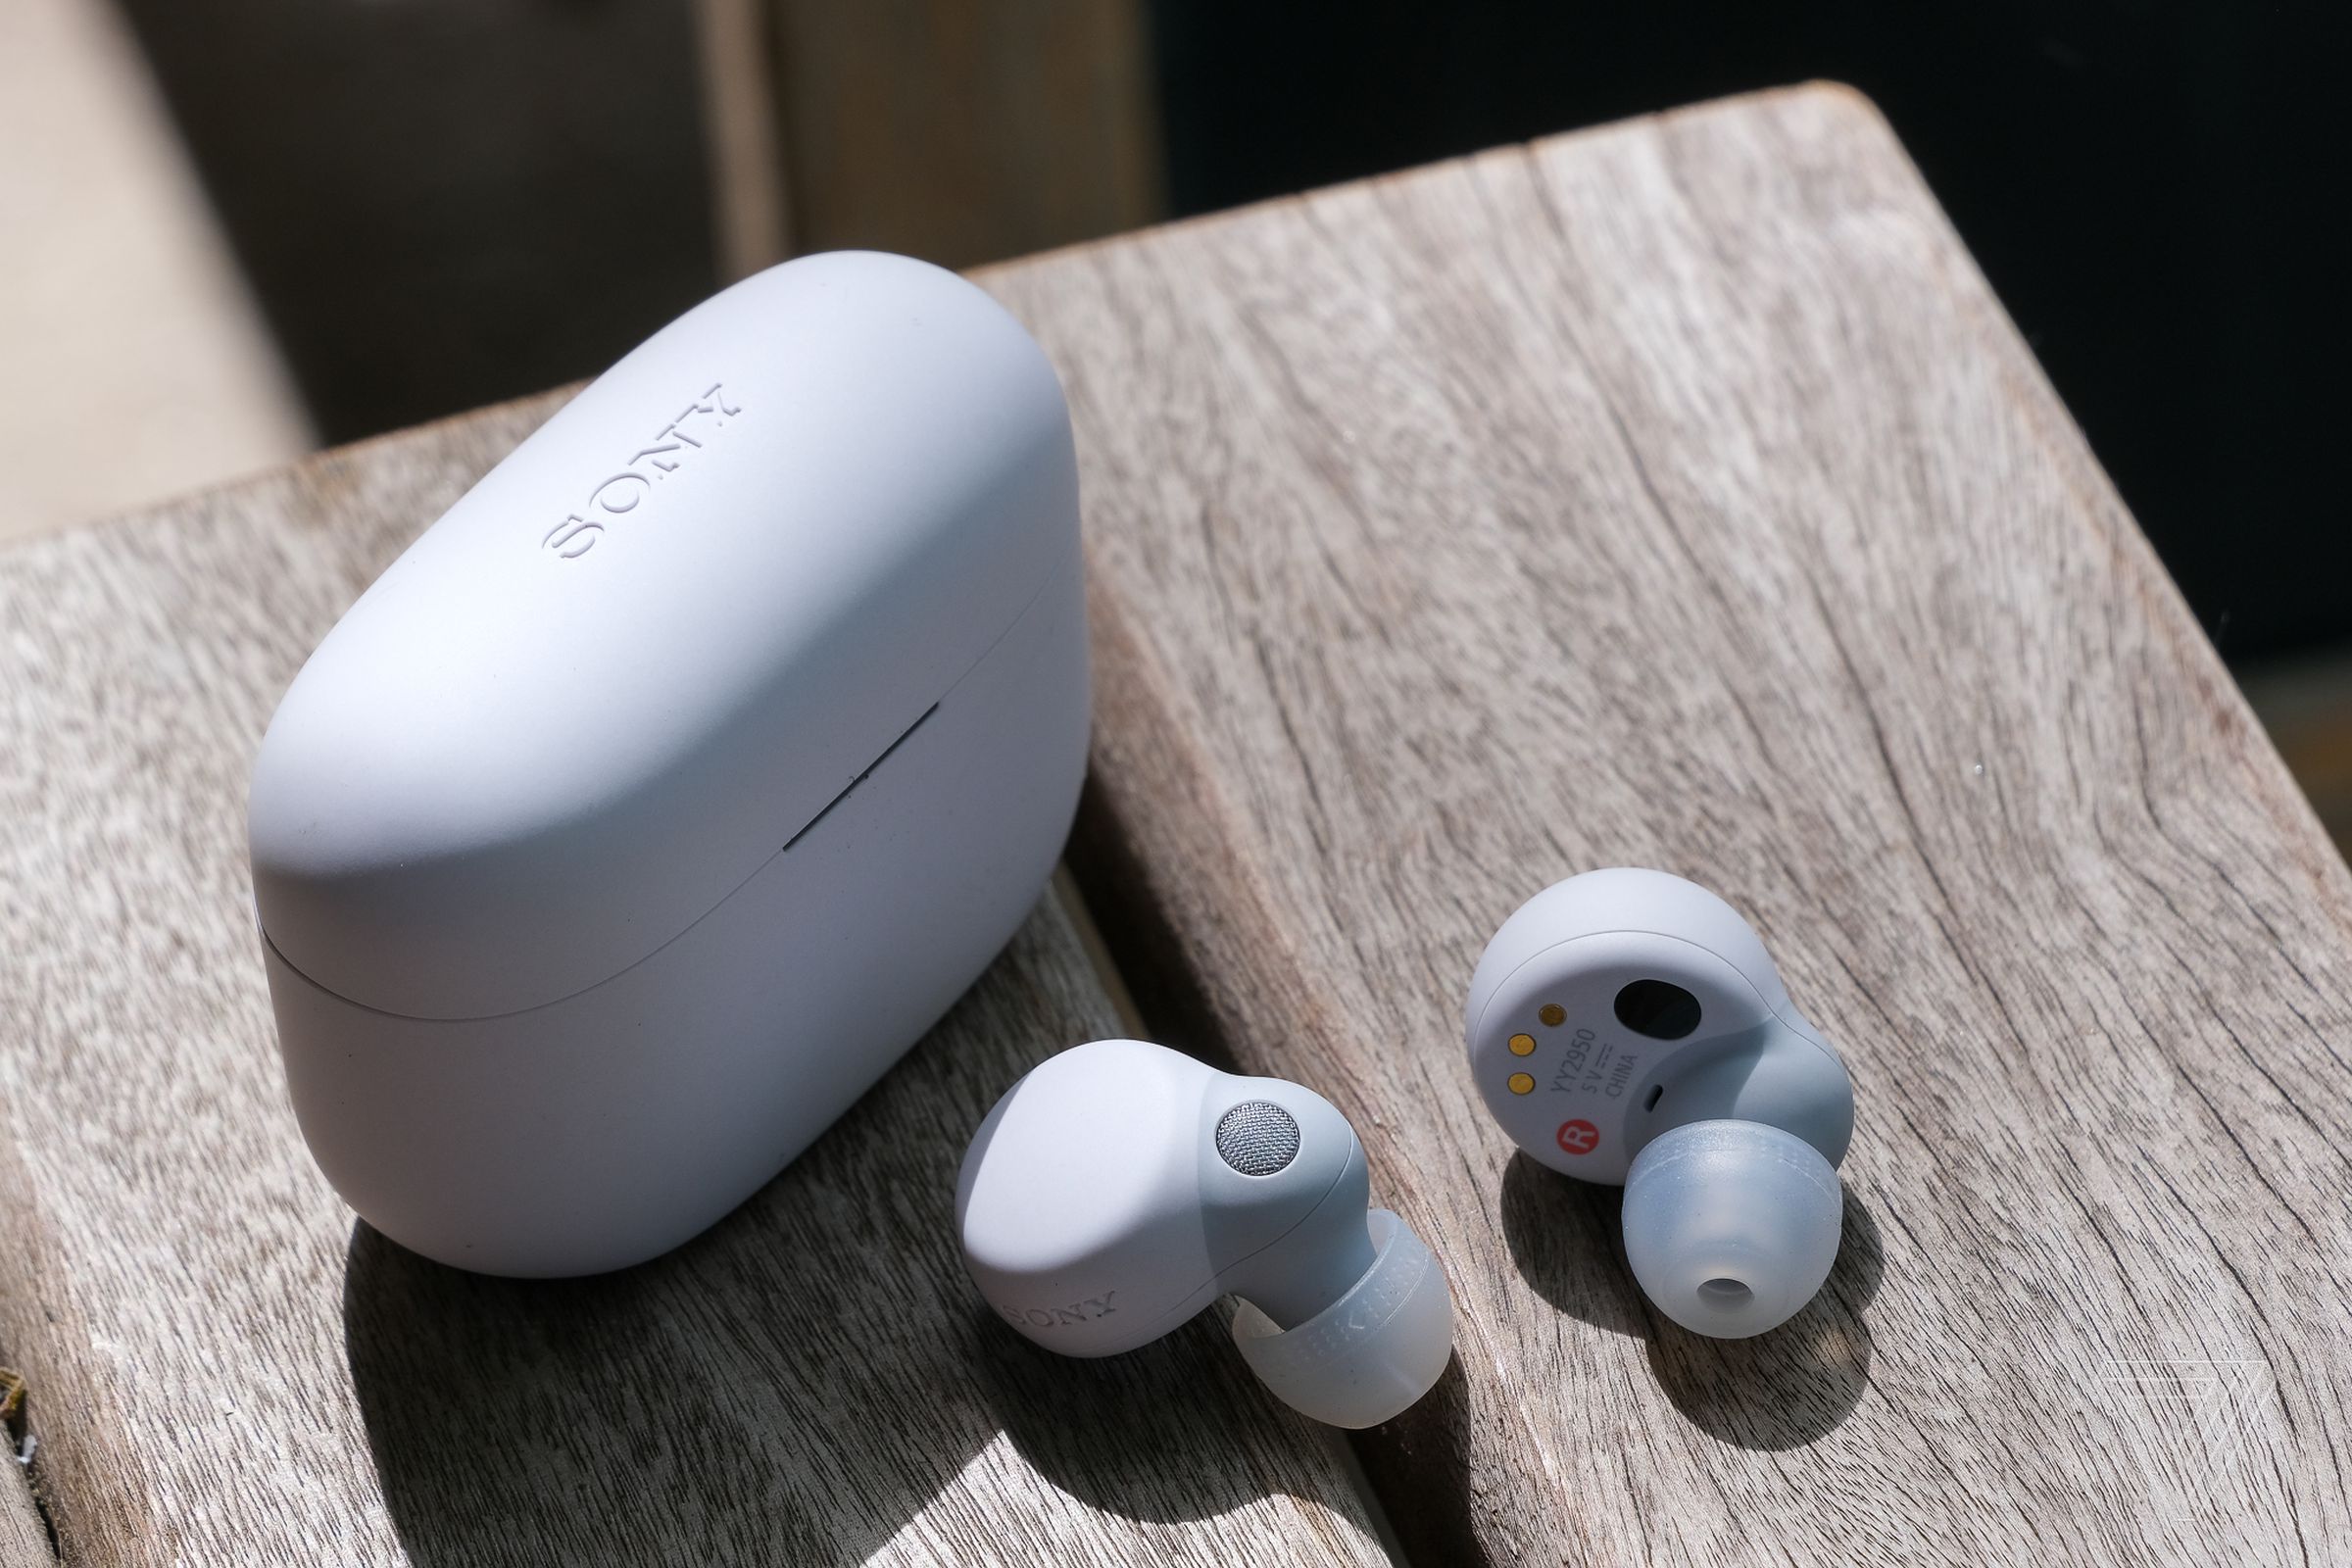 The white Sony LinkBuds S wireless earbuds and their charging case sitting on the edge of a wood table.